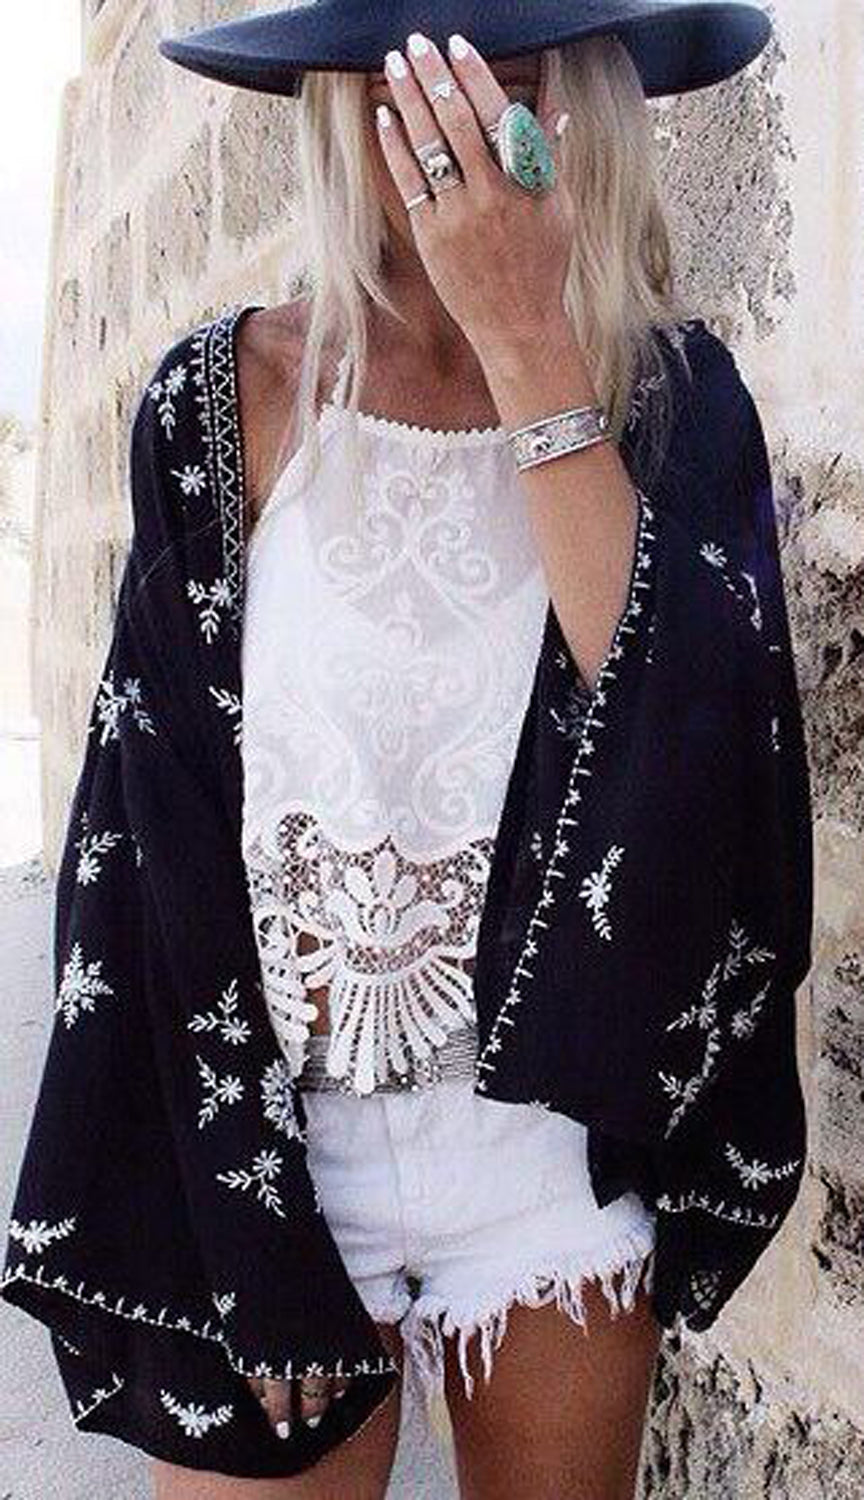 Womens Modern Boho Bohemian Outfit Ideas - Silver Turquoise Statements Rings - Black Floral Lace Poncho - Fedora - MyBodiArt.com